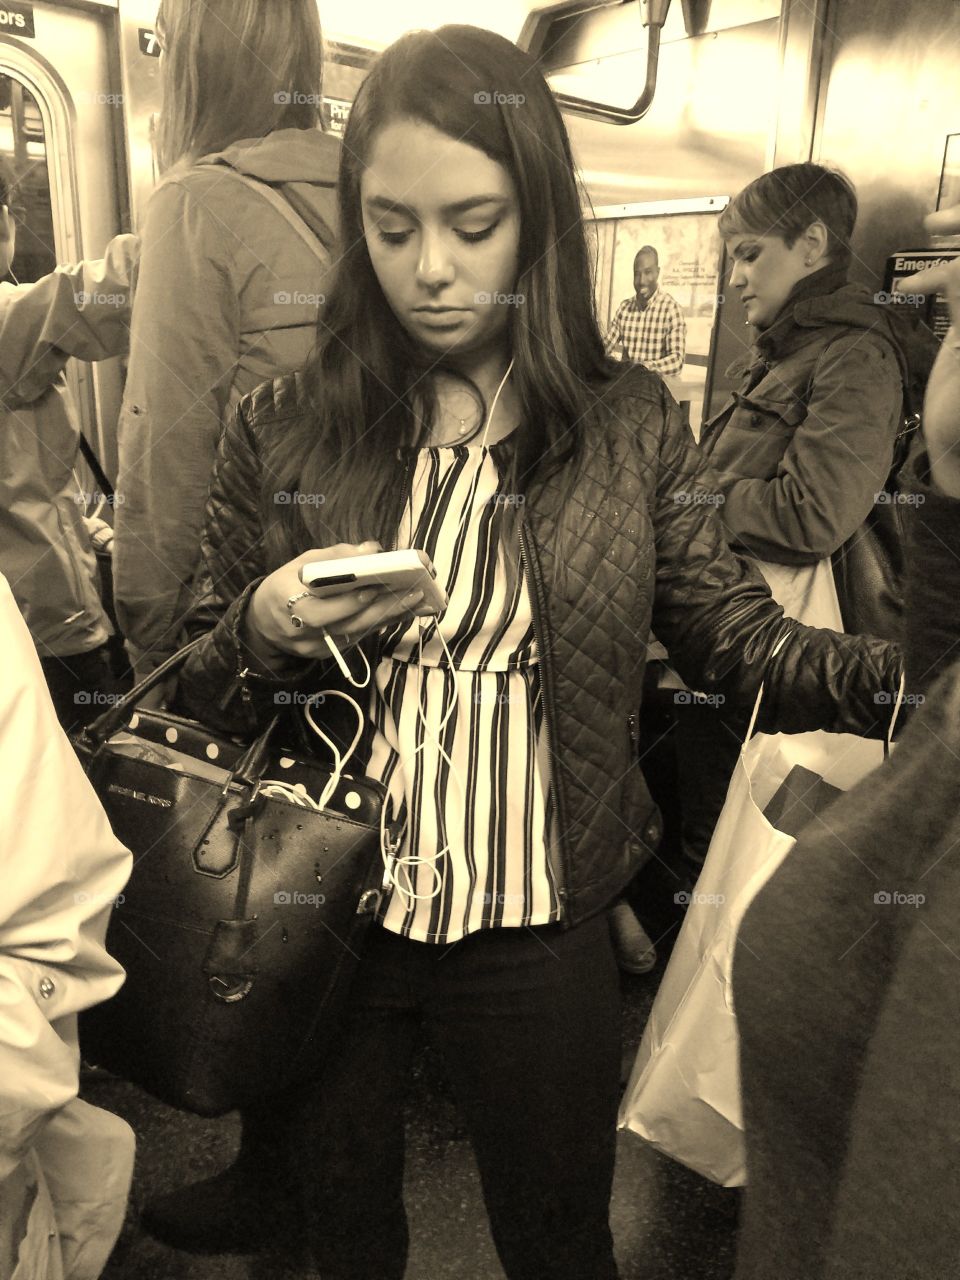 Girl Riding Subway in NYC Looking at her Phone. Sepia Filter.